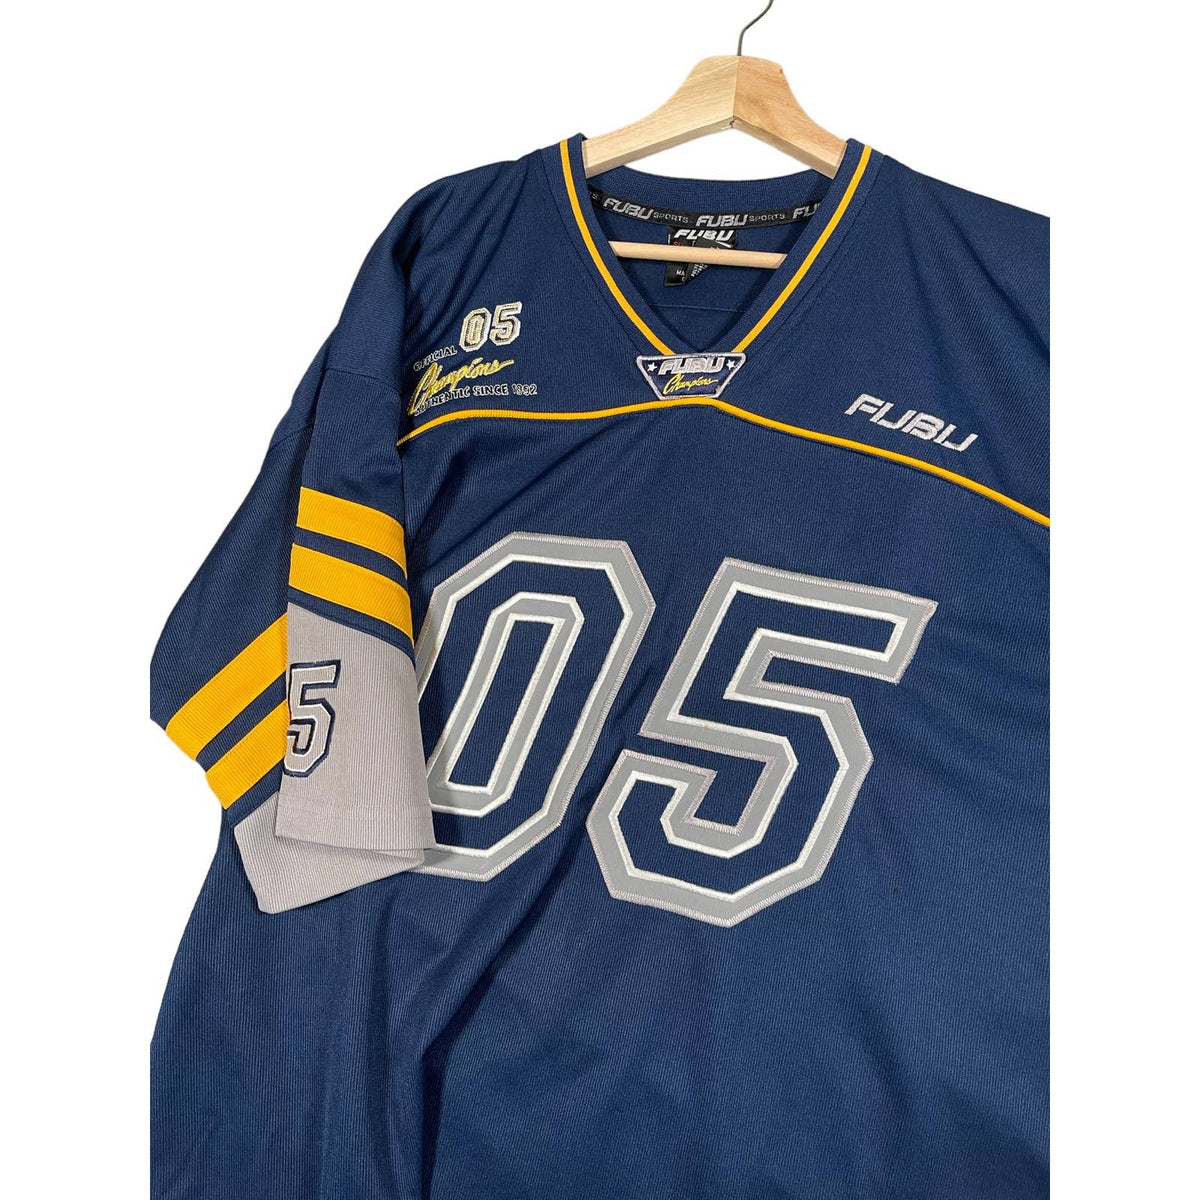 Y2K Fubu Sports Collection Navy Football Mesh Jersey